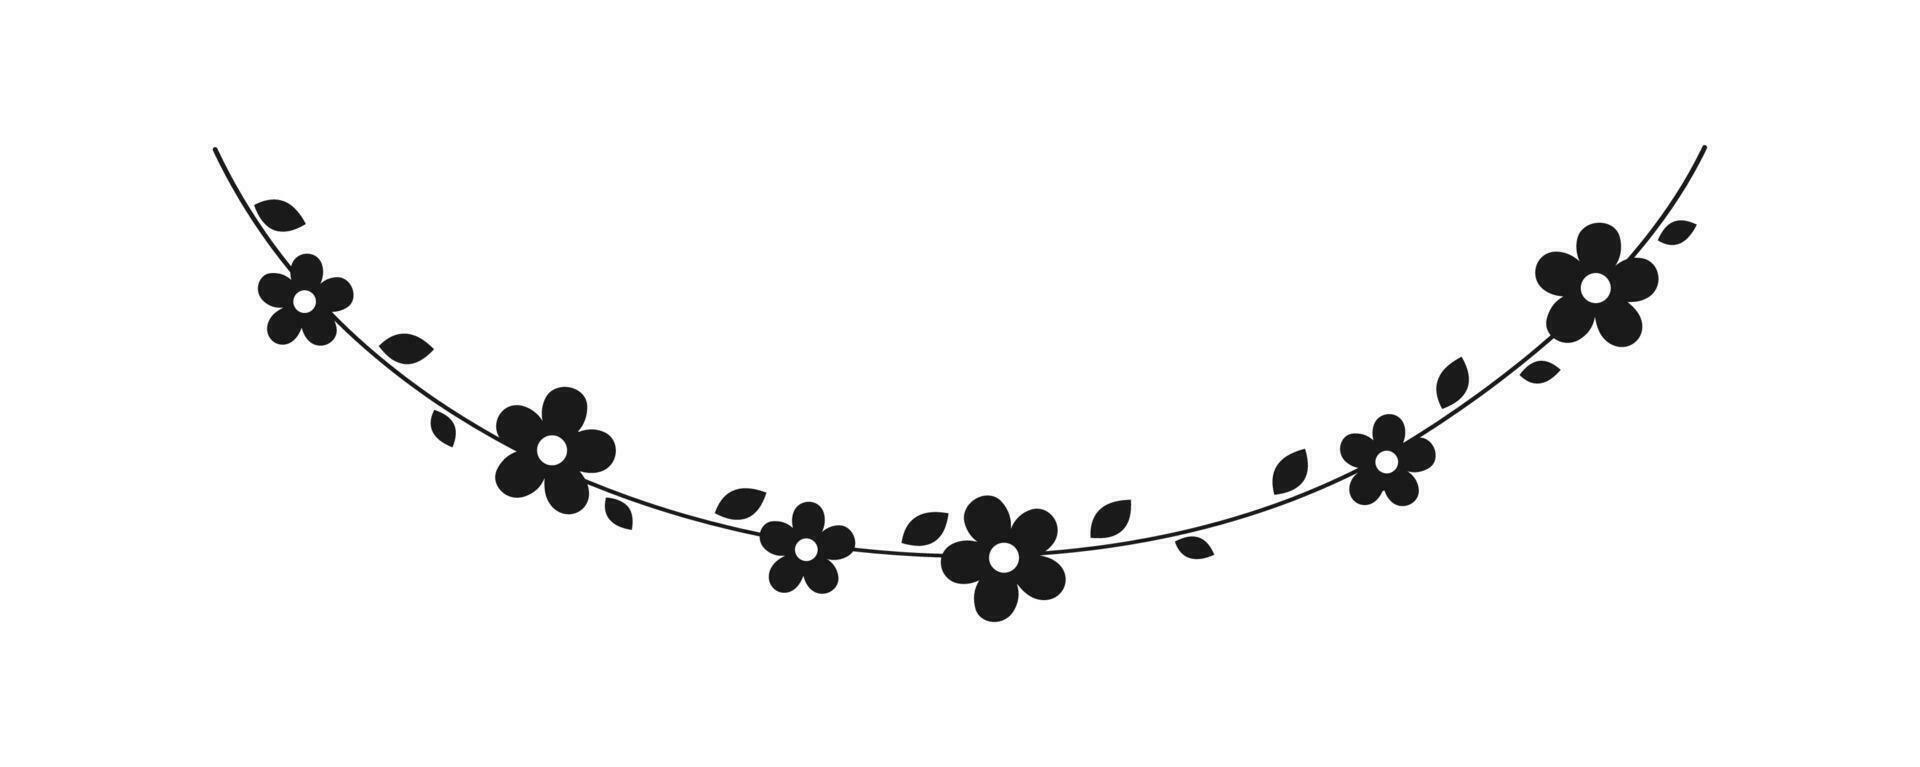 Hanging vines with flowers garland silhouette vector illustration ...